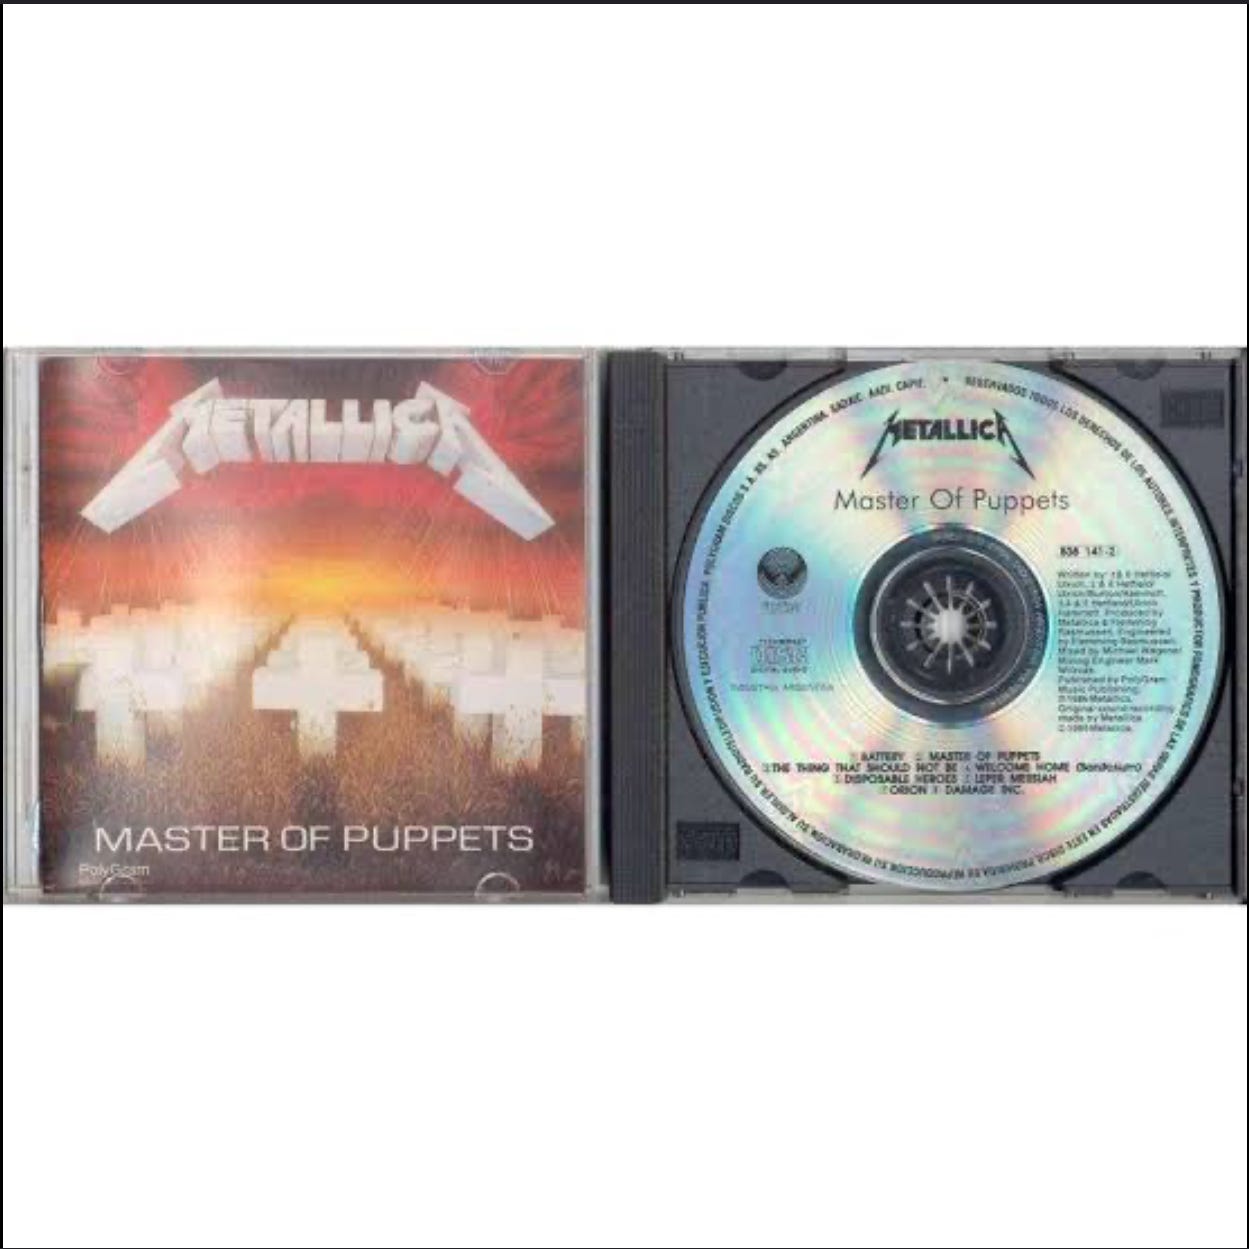 Only CDs Is Sounding Like These # 3: Metallica, Master of Puppets (1986)